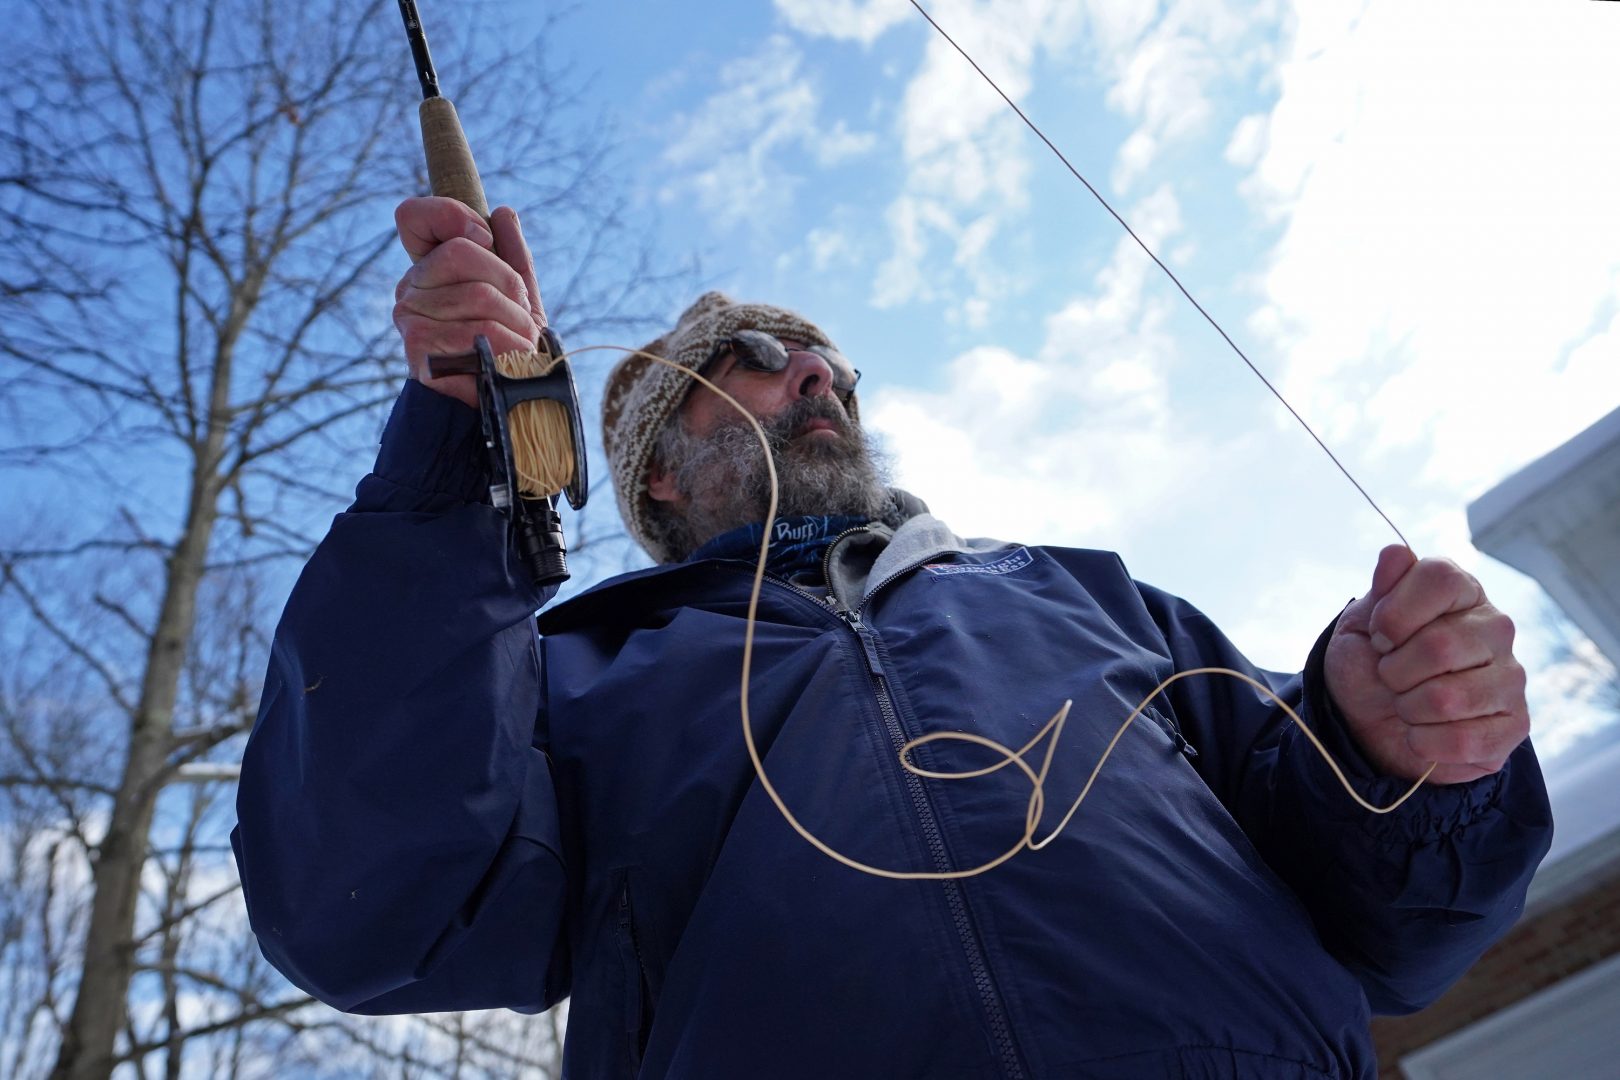 Steve Schwartz demonstrates fly fishing technique in front of his home in Equinunk, Pennsylvania. (Matt Smith/WHYY)